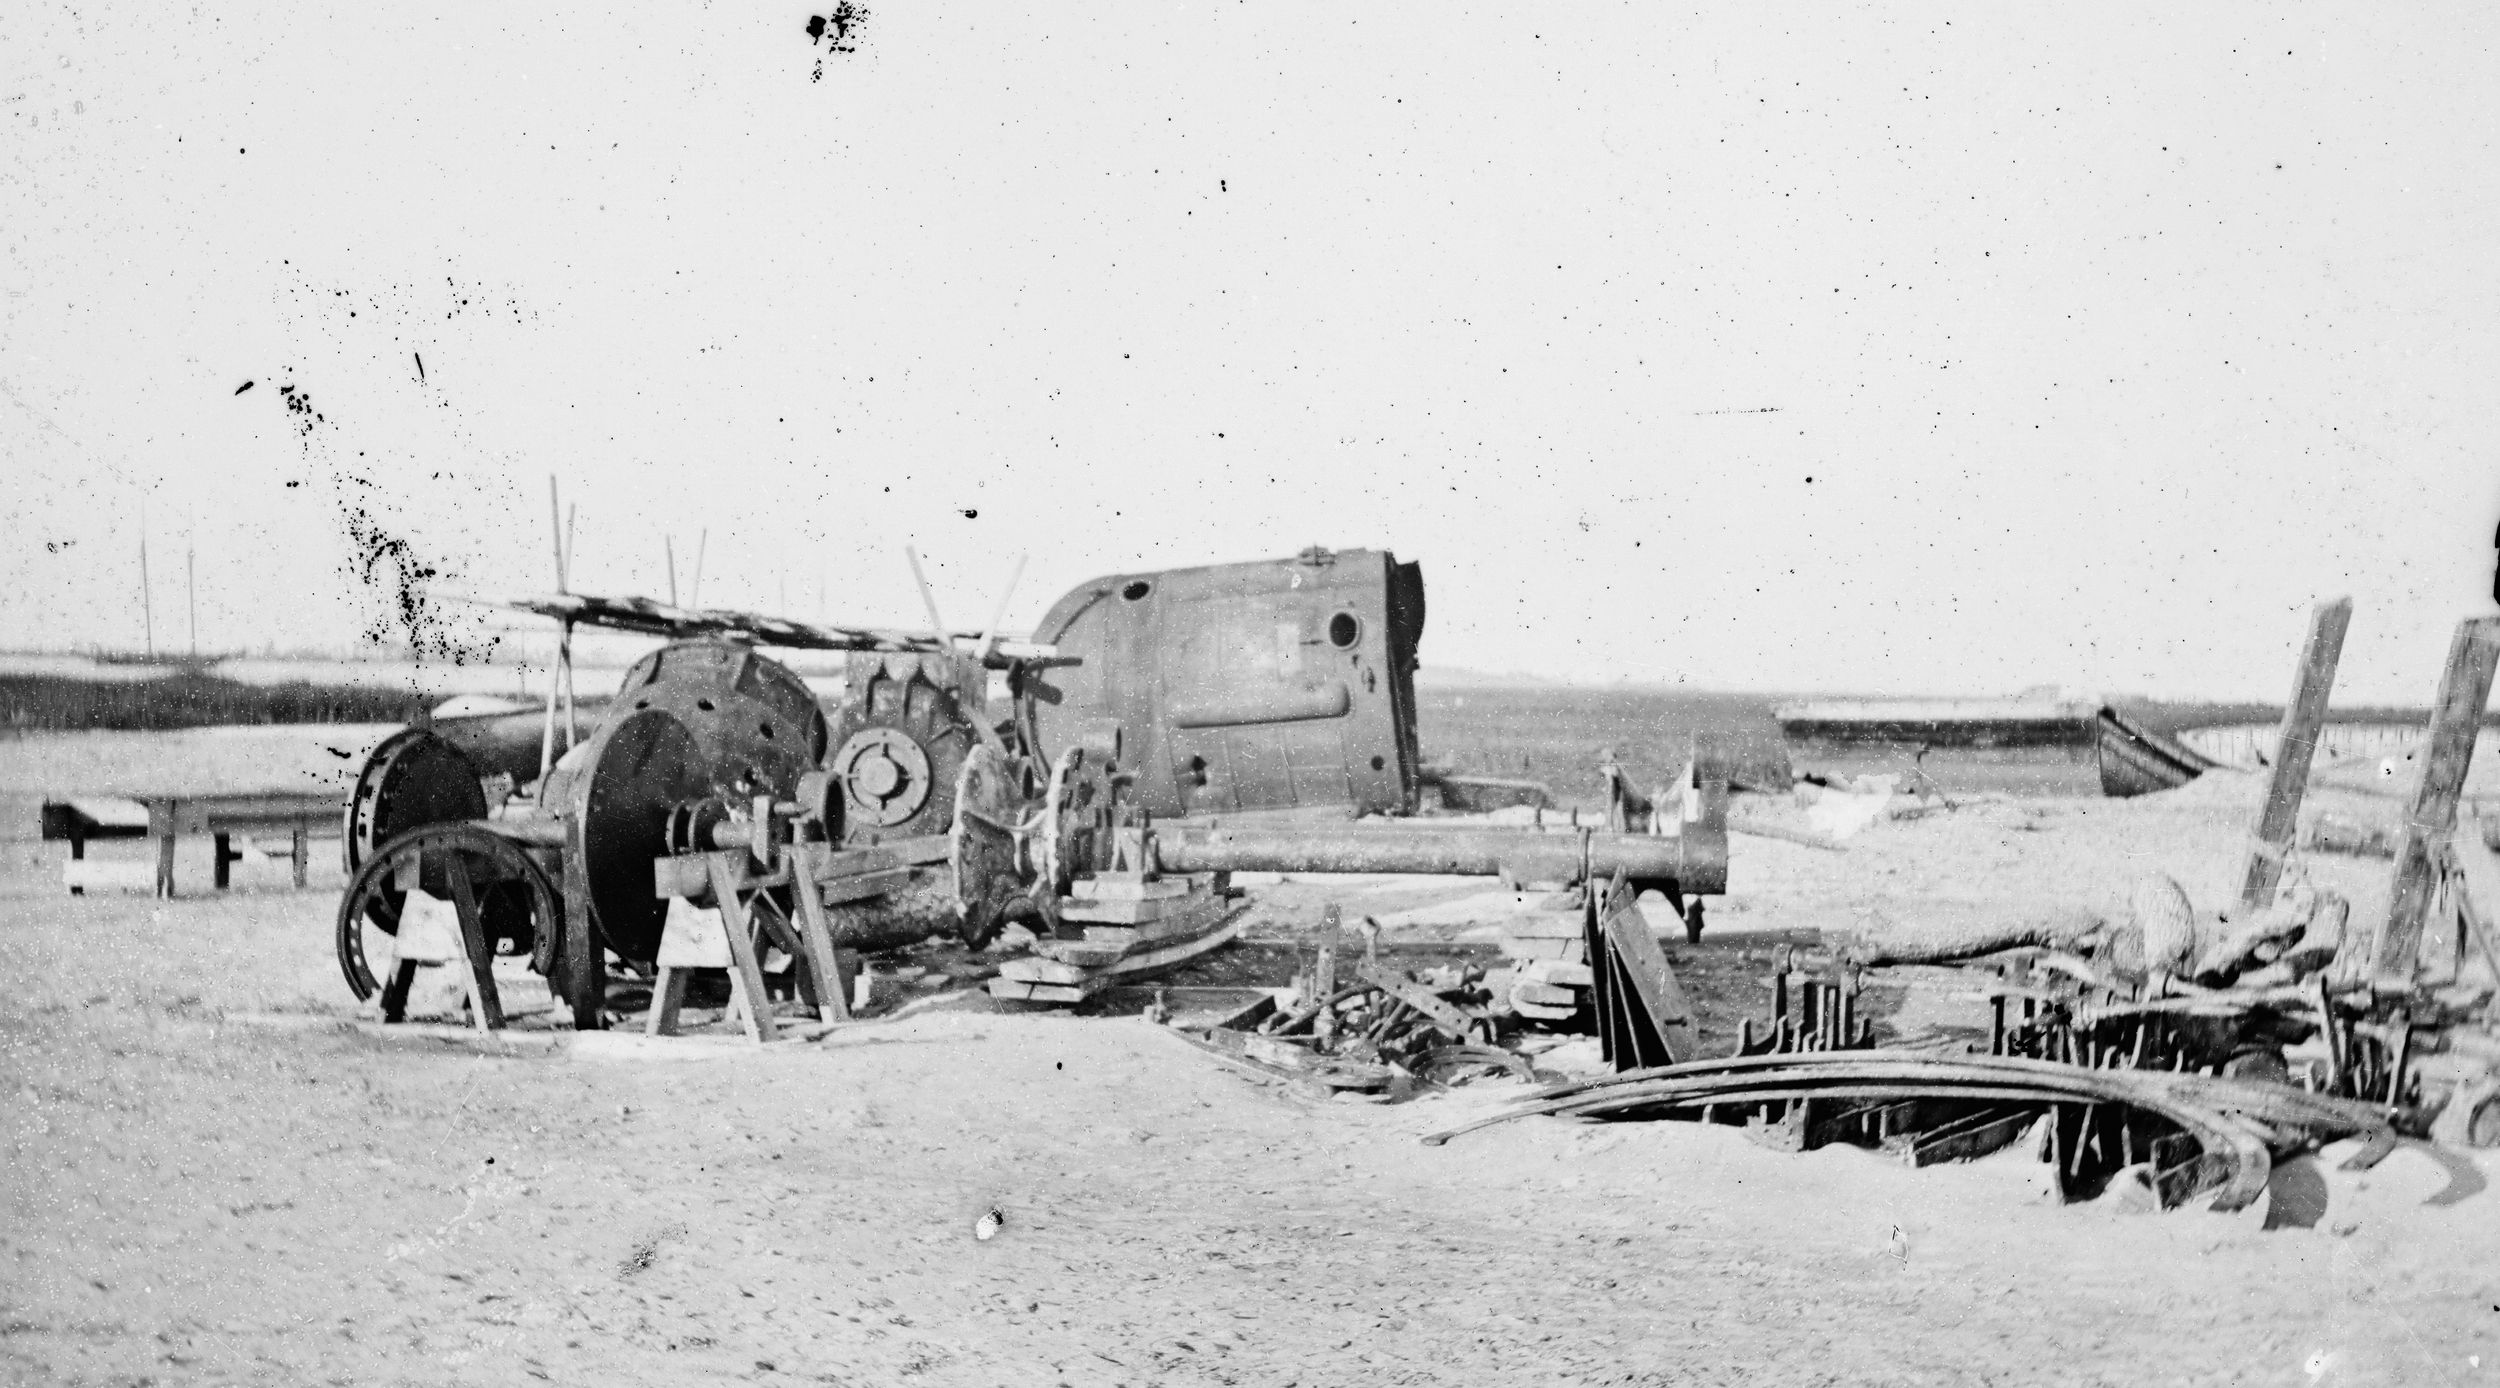 Beached remains of the British-built blockade-runner Ruby, which ran aground on June 11, 1863, at Folly Island, South Carolina.